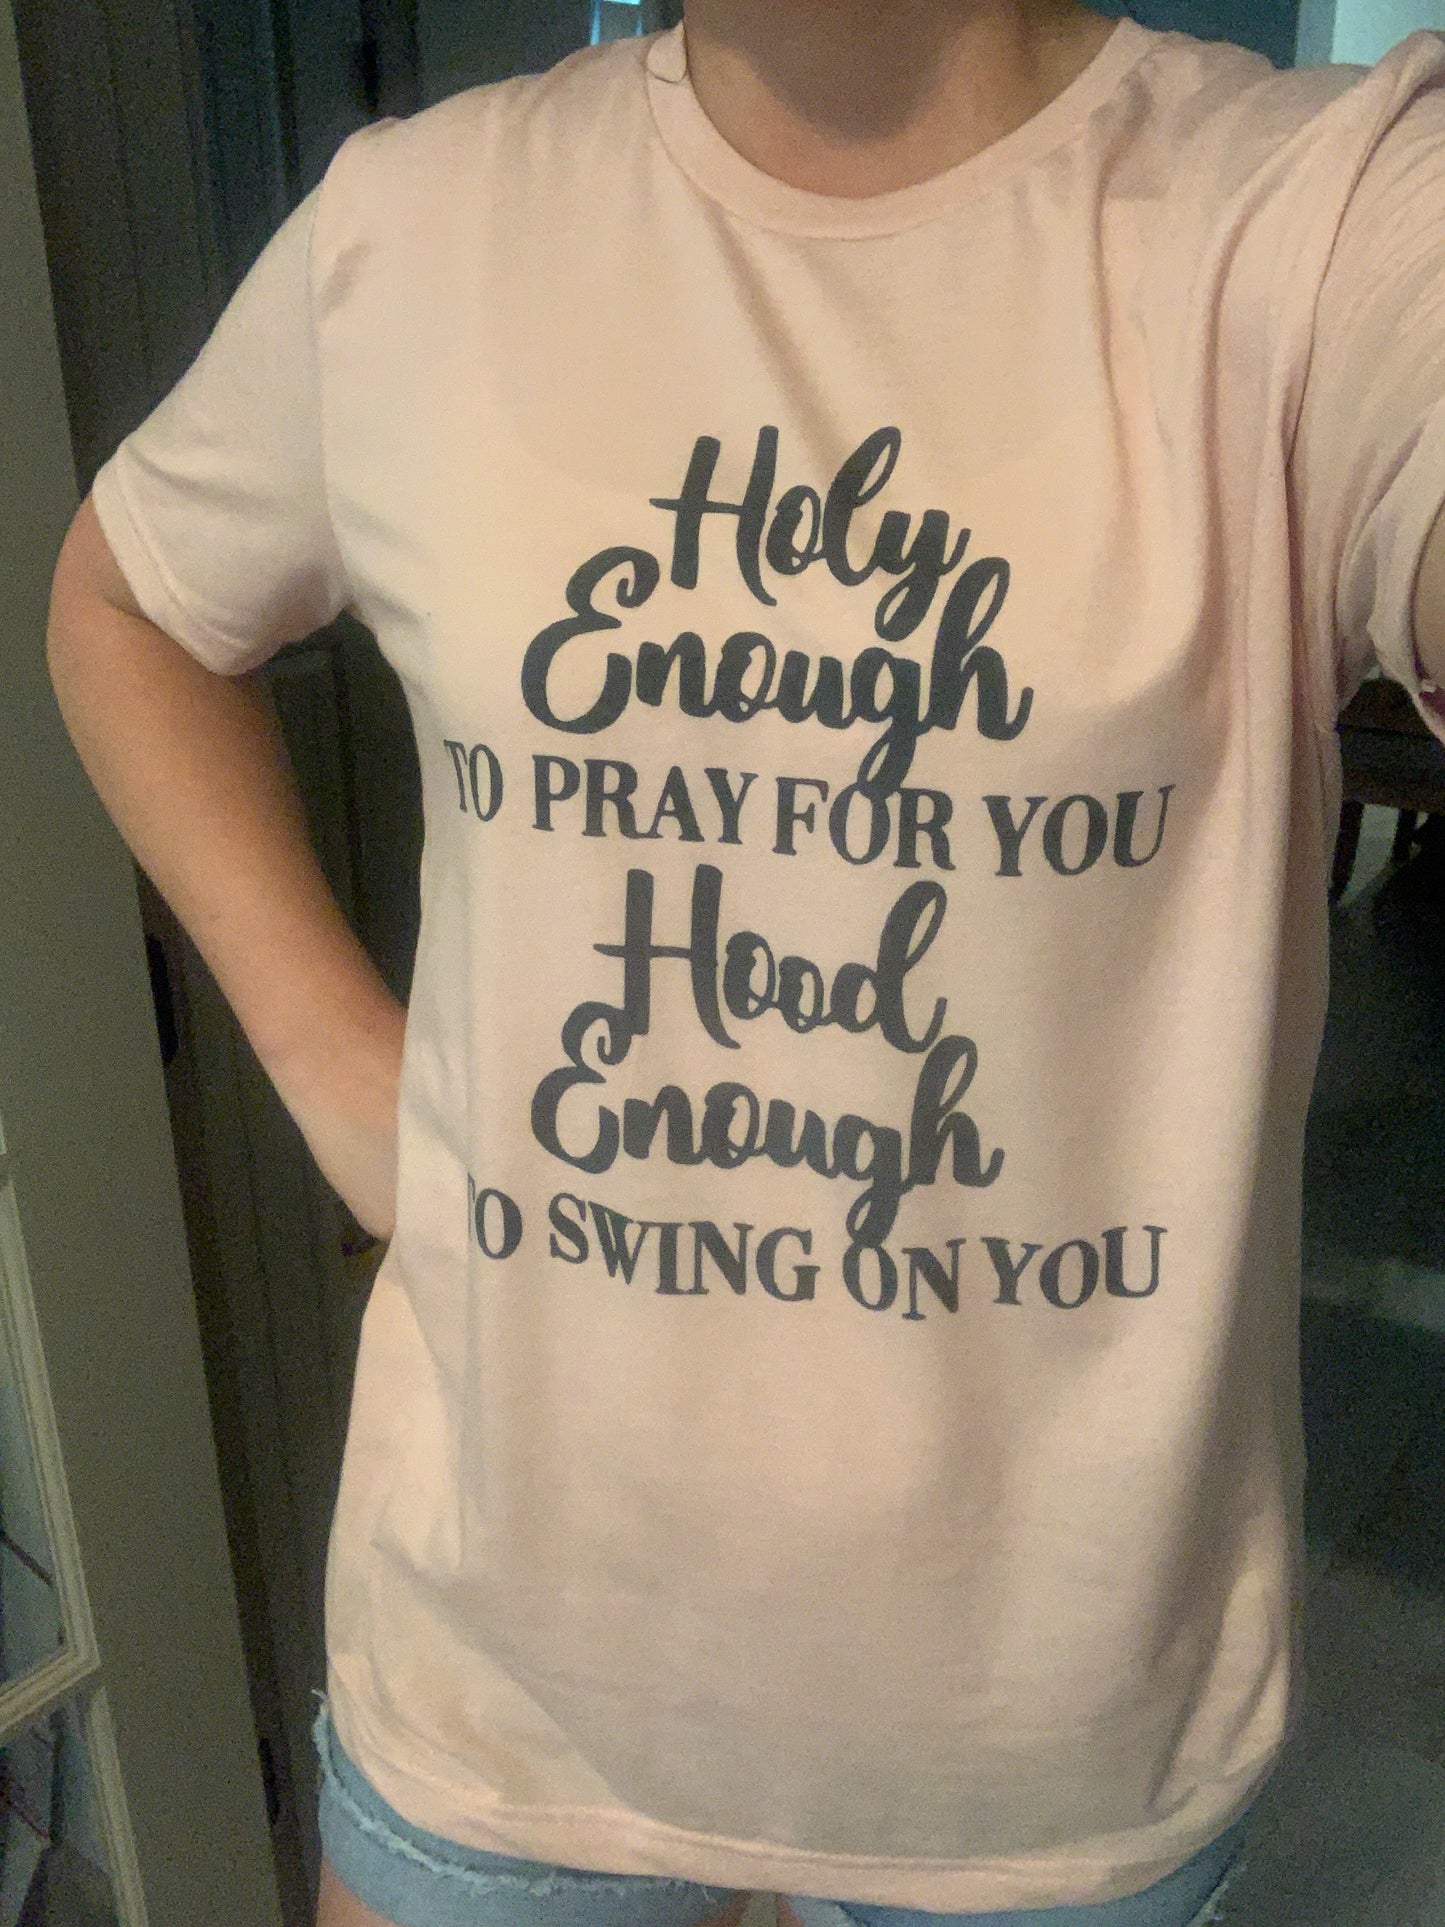 Holy Enough to Pray for You; Hood Enough to Swing on You